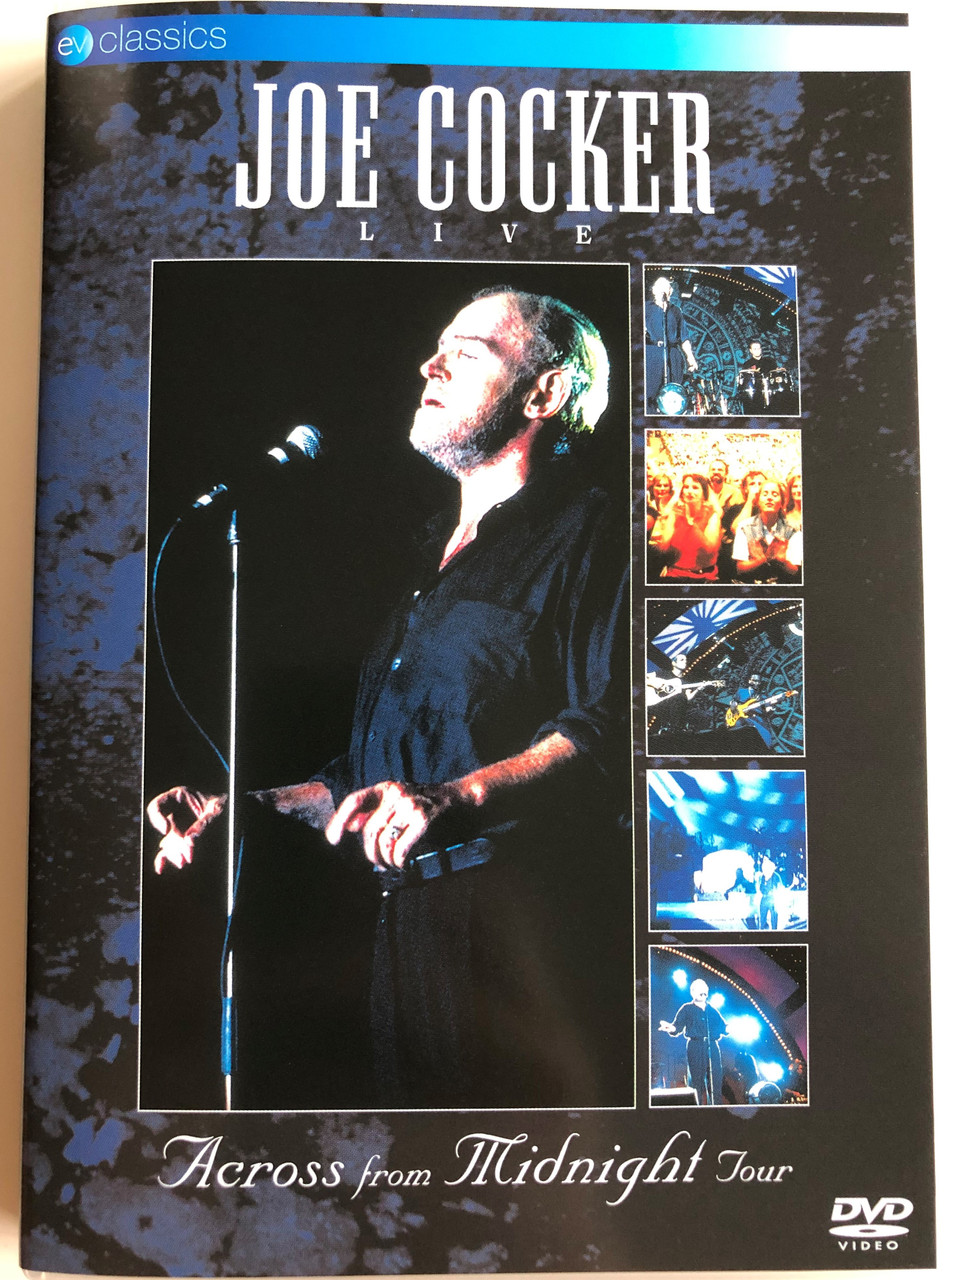 Joe Cocker Live DVD 1997 / Across from the Midnight Tour / Directed by  Egbert van Hees / Could